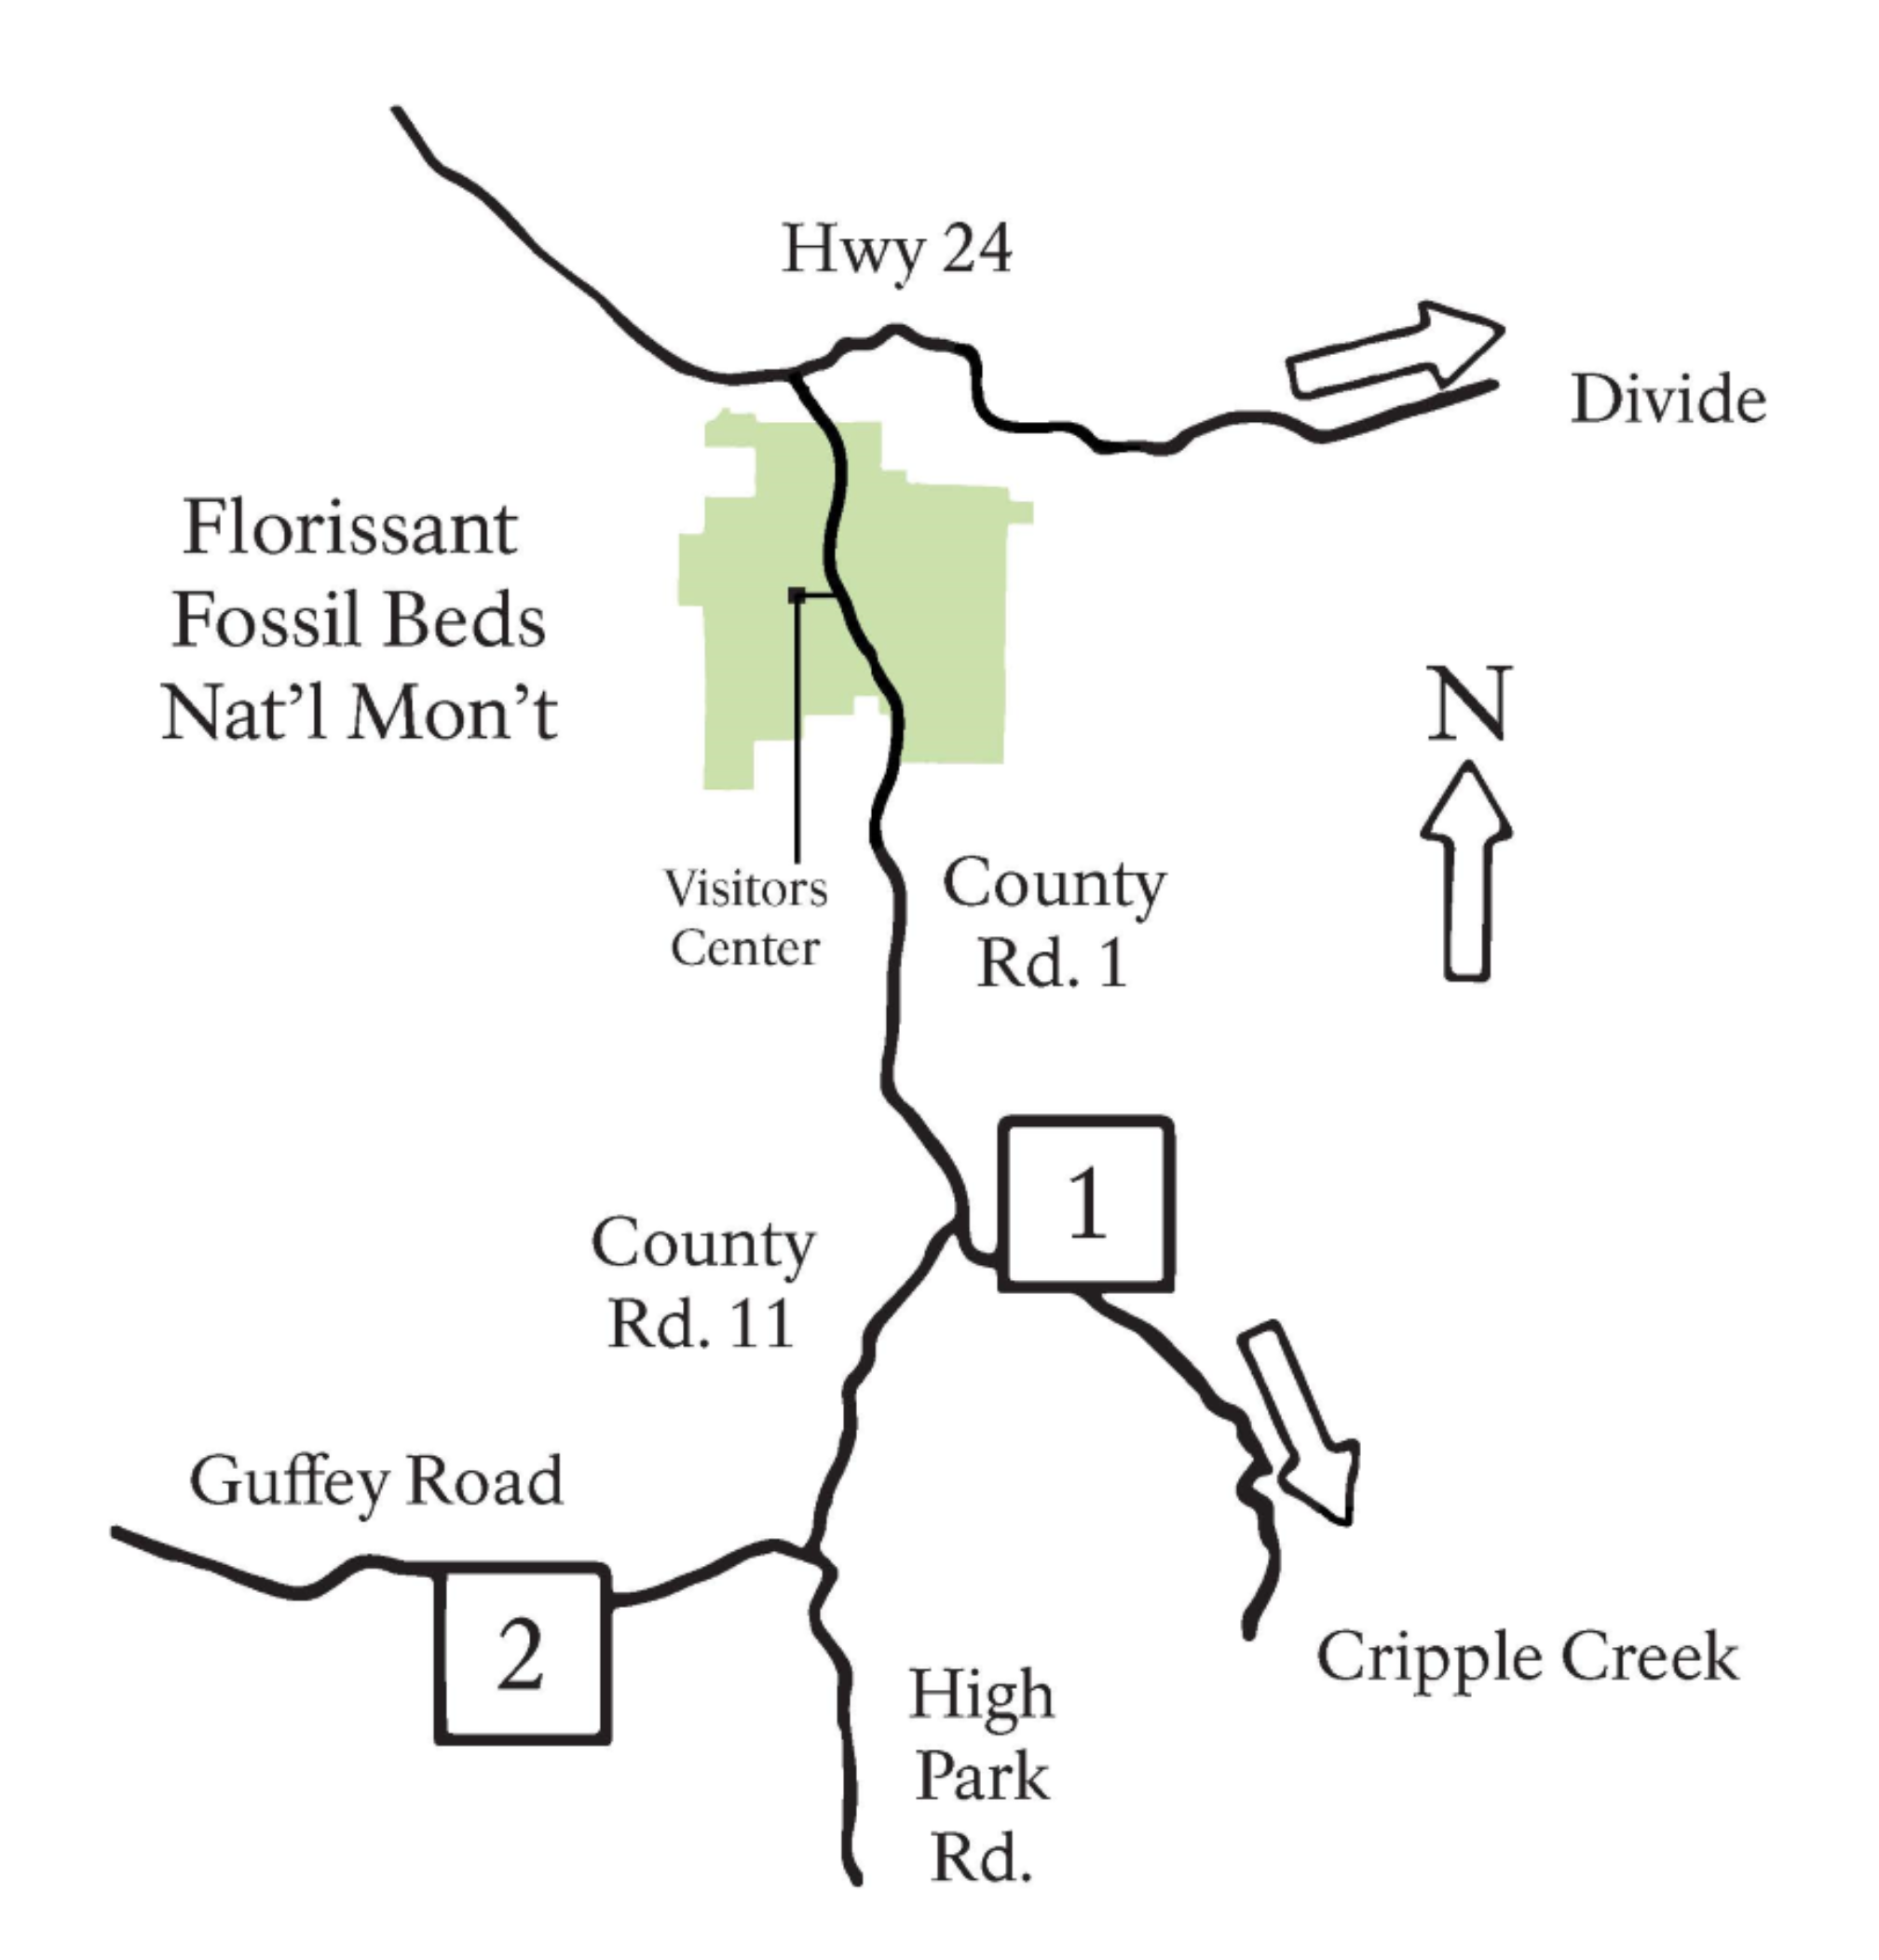 Map of Florissant Fossil Beds Area Including Teller County Road 1 and roads to Guffey